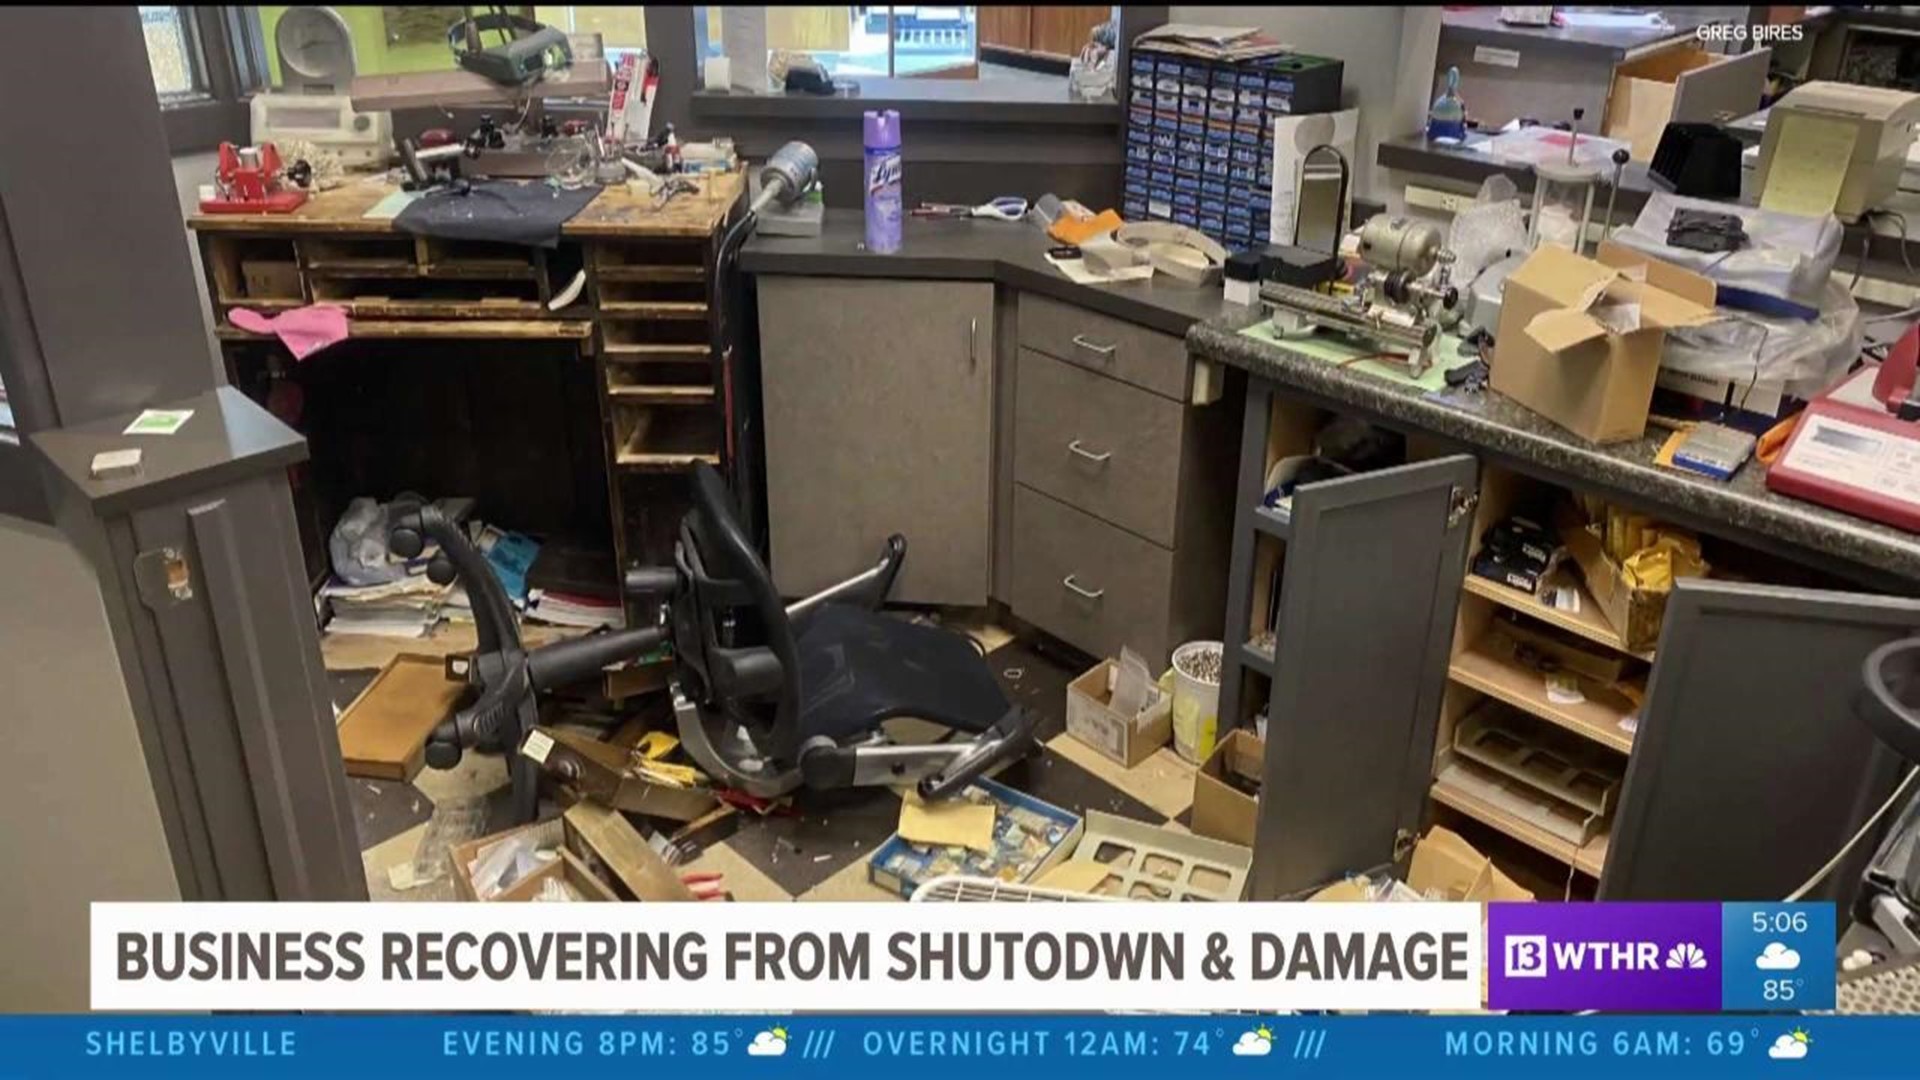 Businesses recovering from shutdown & damage